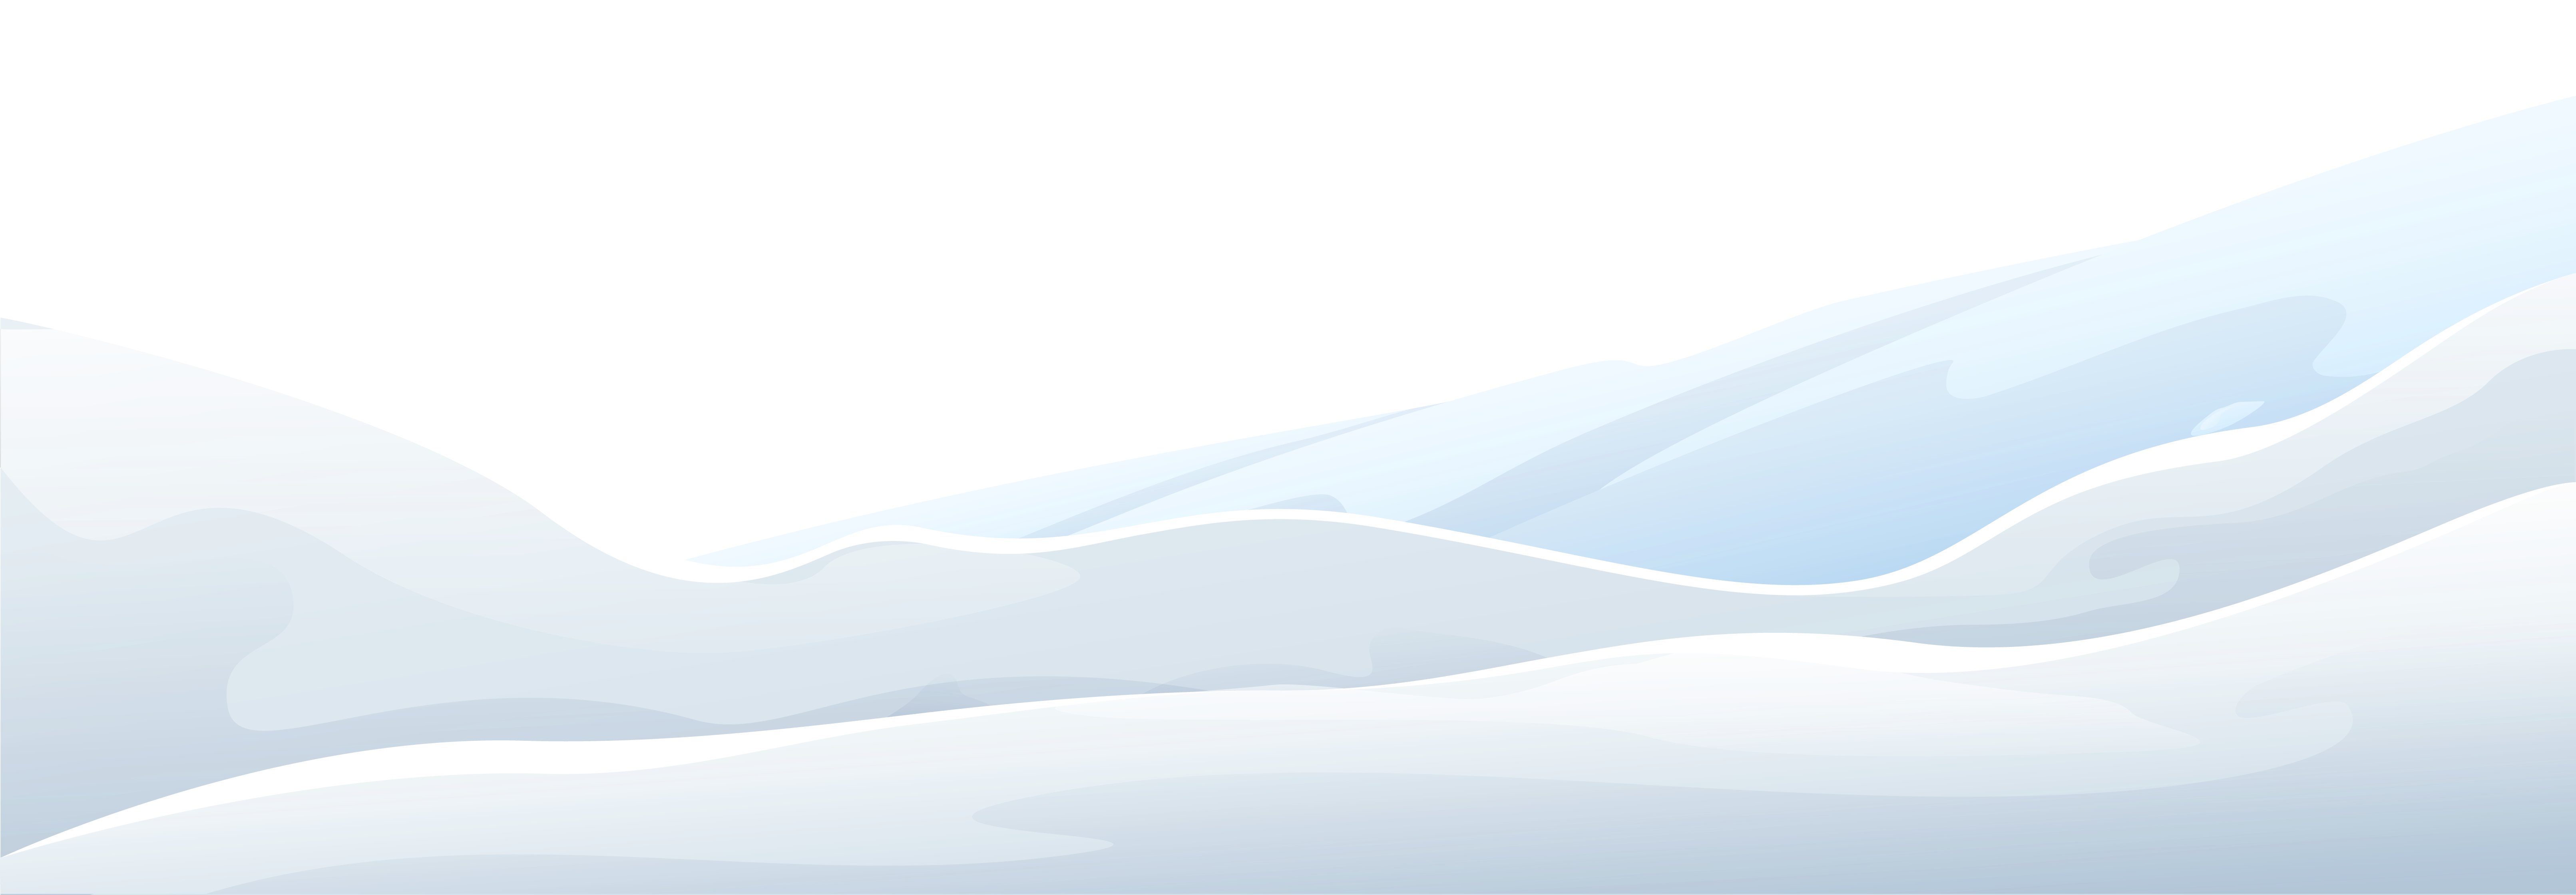 snow-on-the-ground-png-clip-art-library